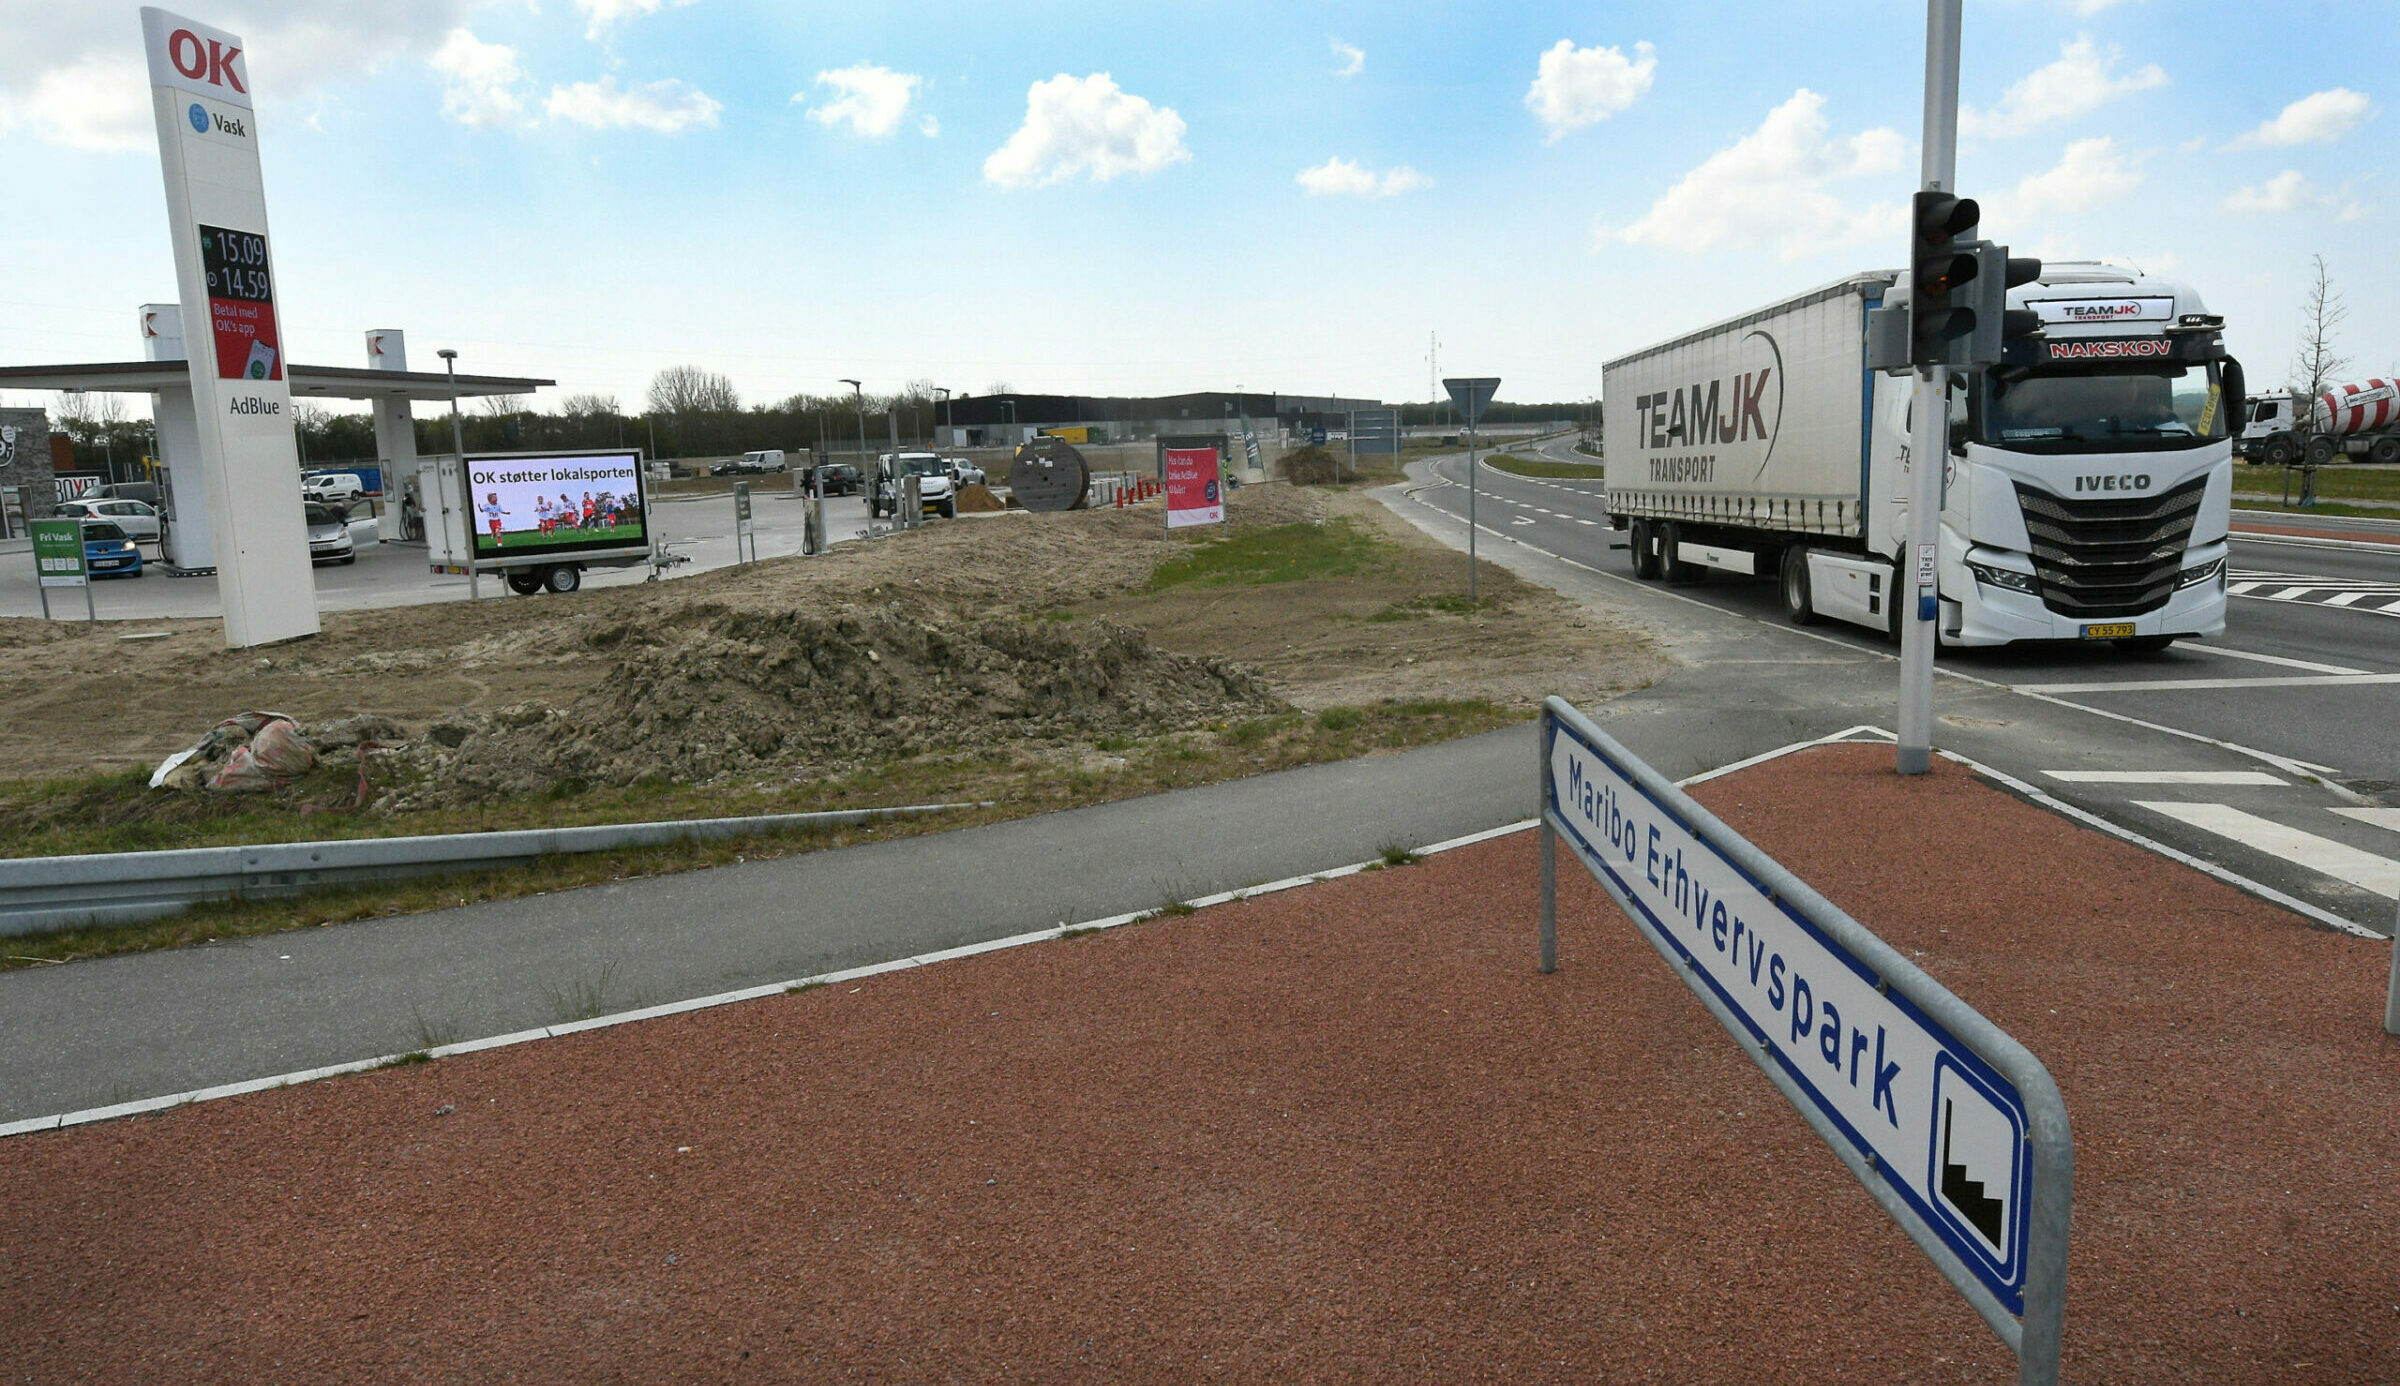 Construction is in full swing in Erhvervspark Maribo, which is now ready for the next stage.